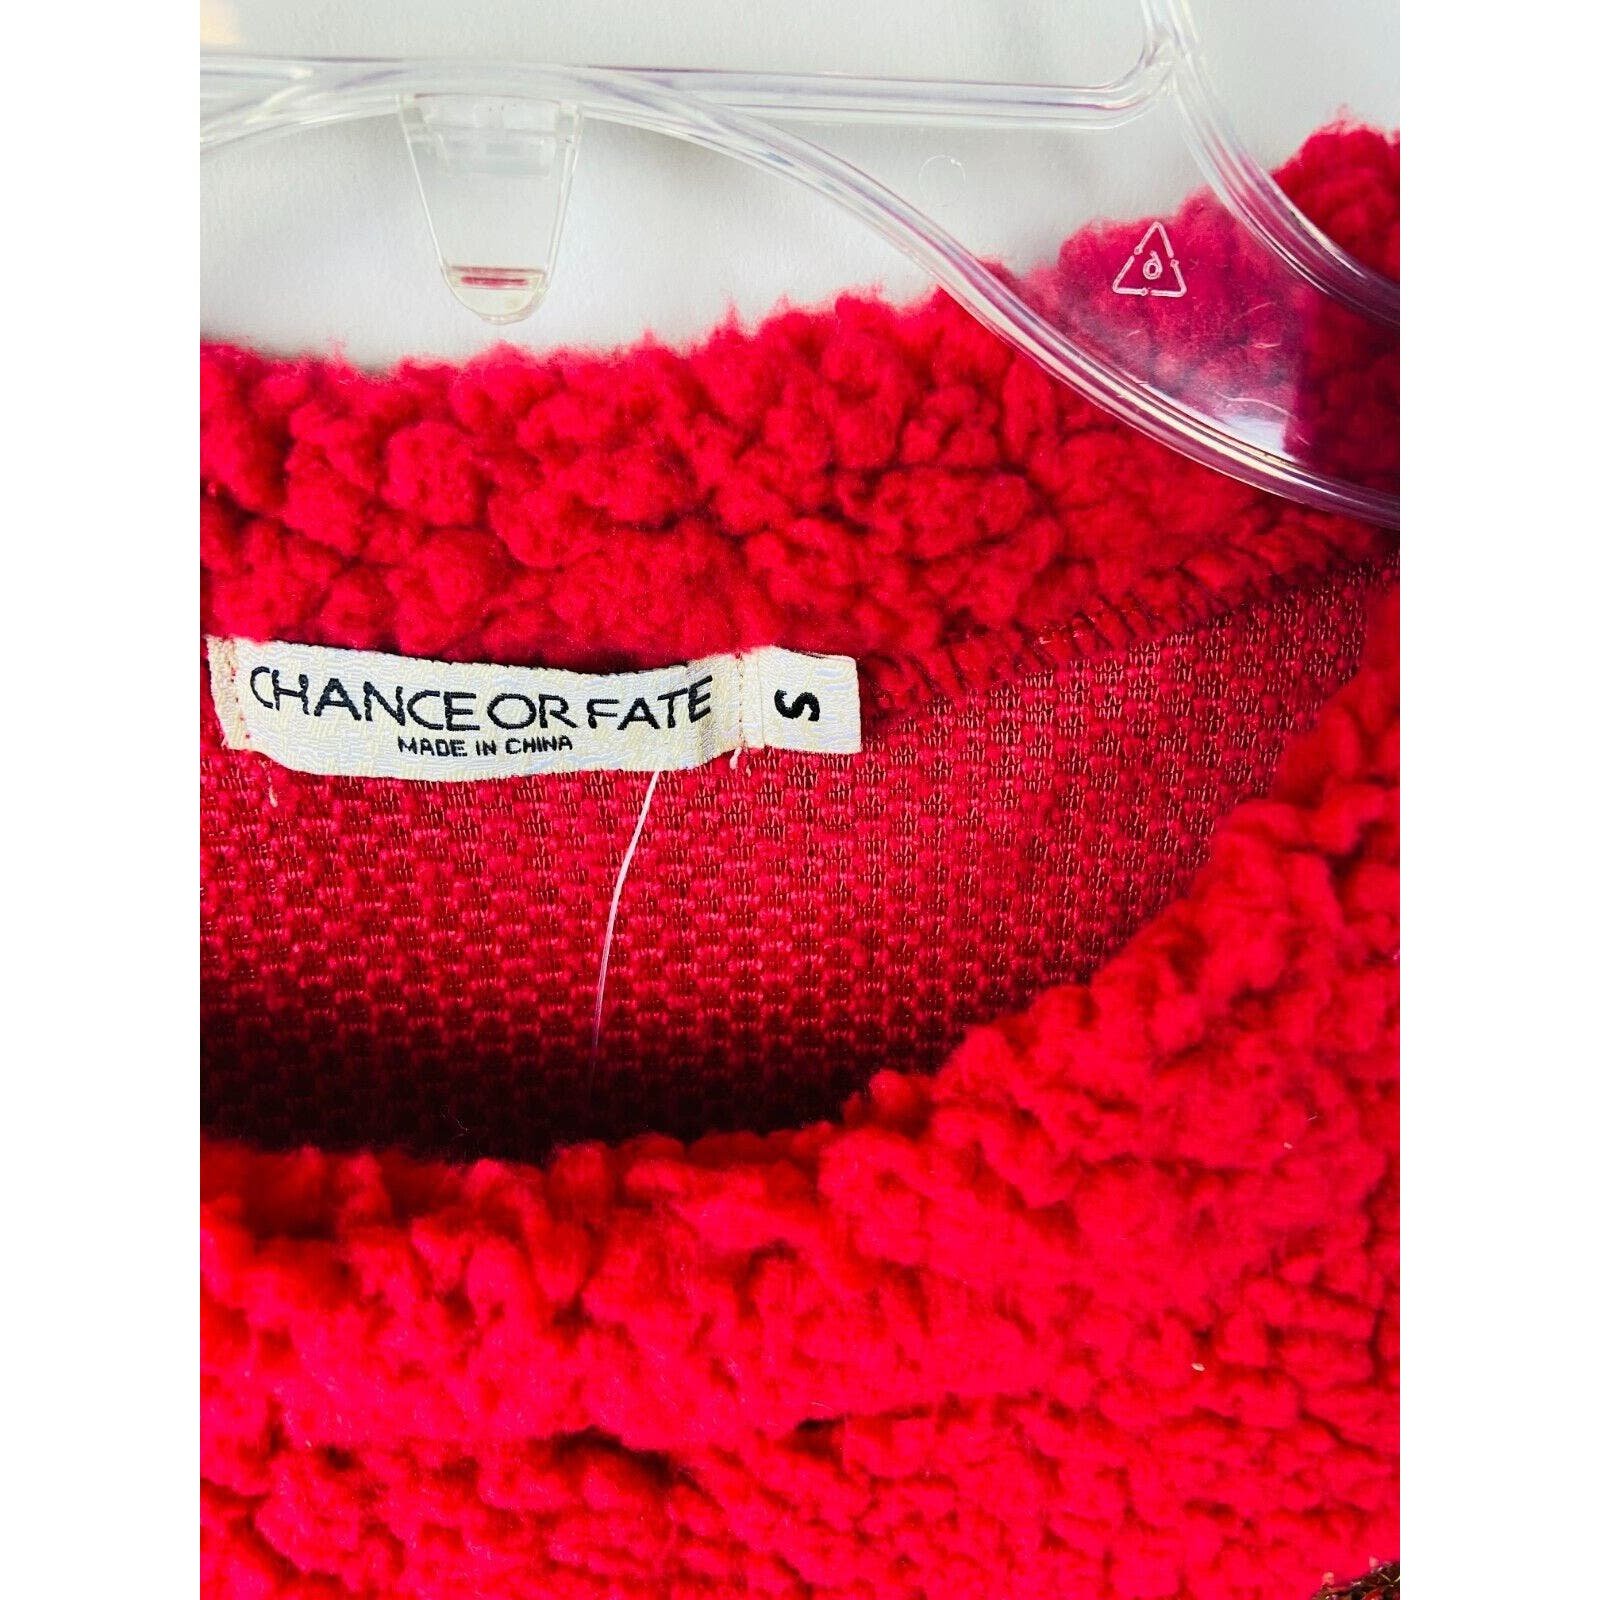 Classic Chance or Fate Womens Pullover Sweater Crew Neck Long Sleeve Red Size Small NWT G39EejYfG US Sale